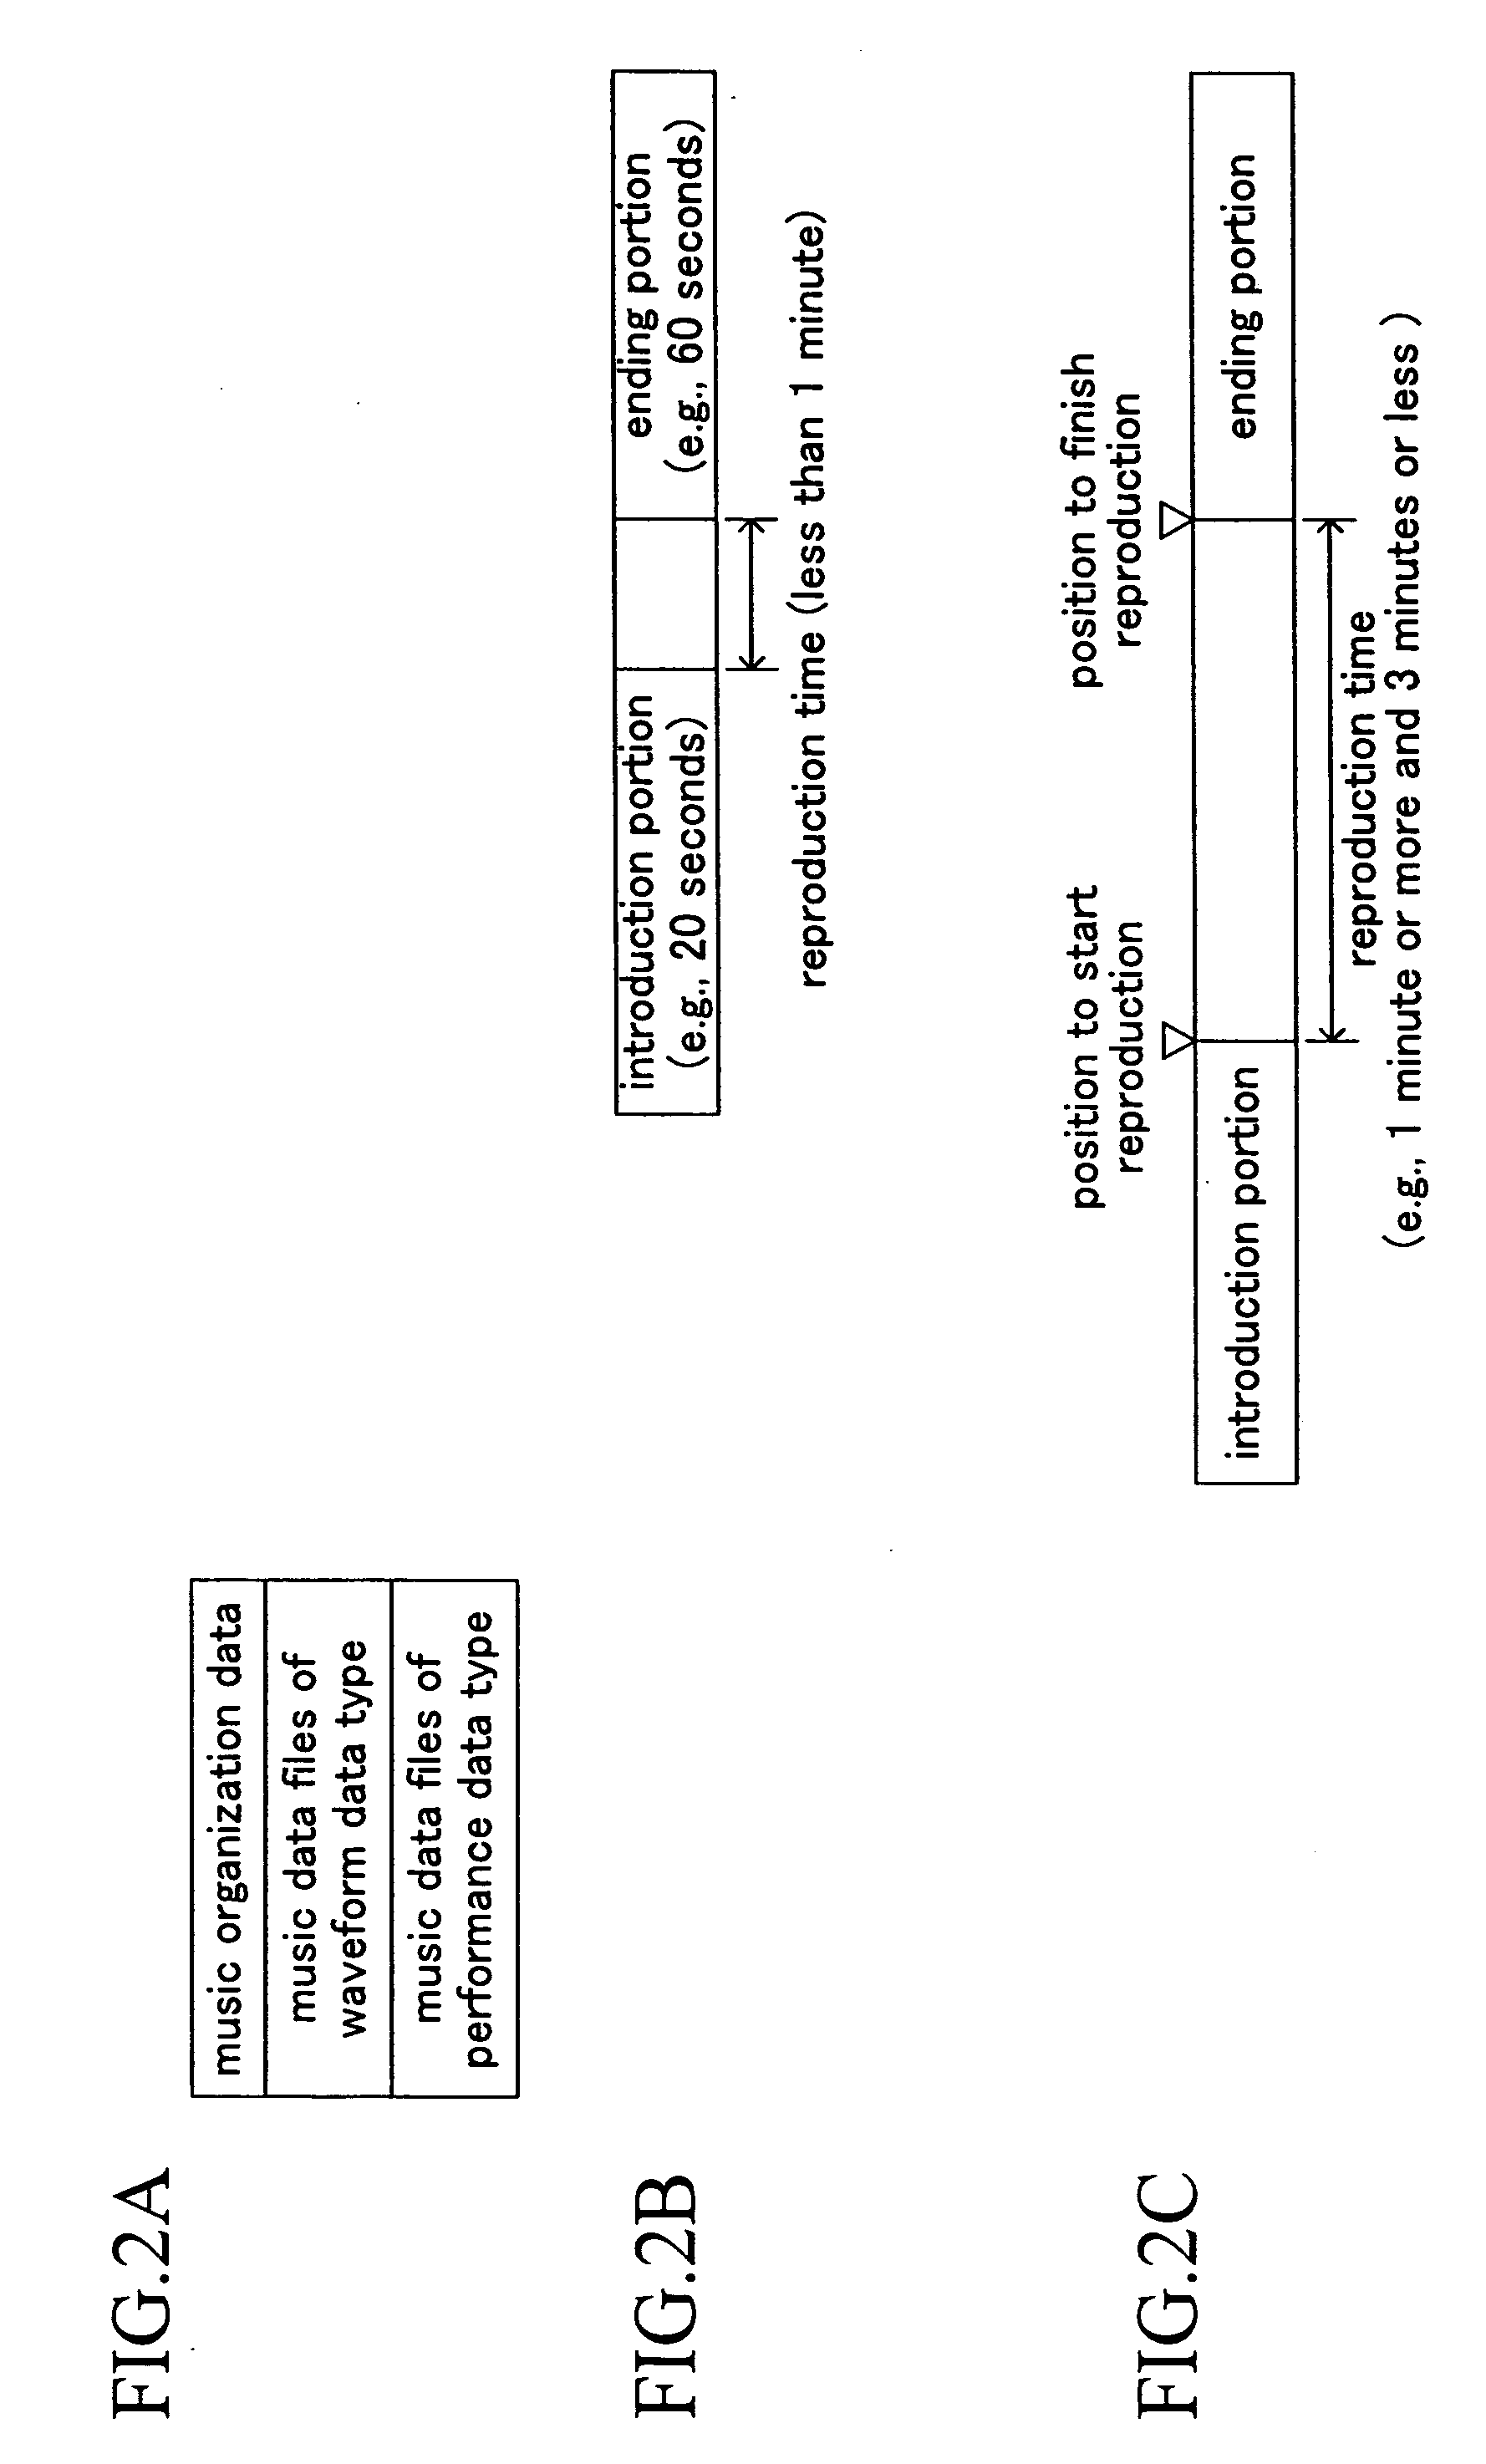 Apparatus for controlling music reproduction and apparatus for reproducing music